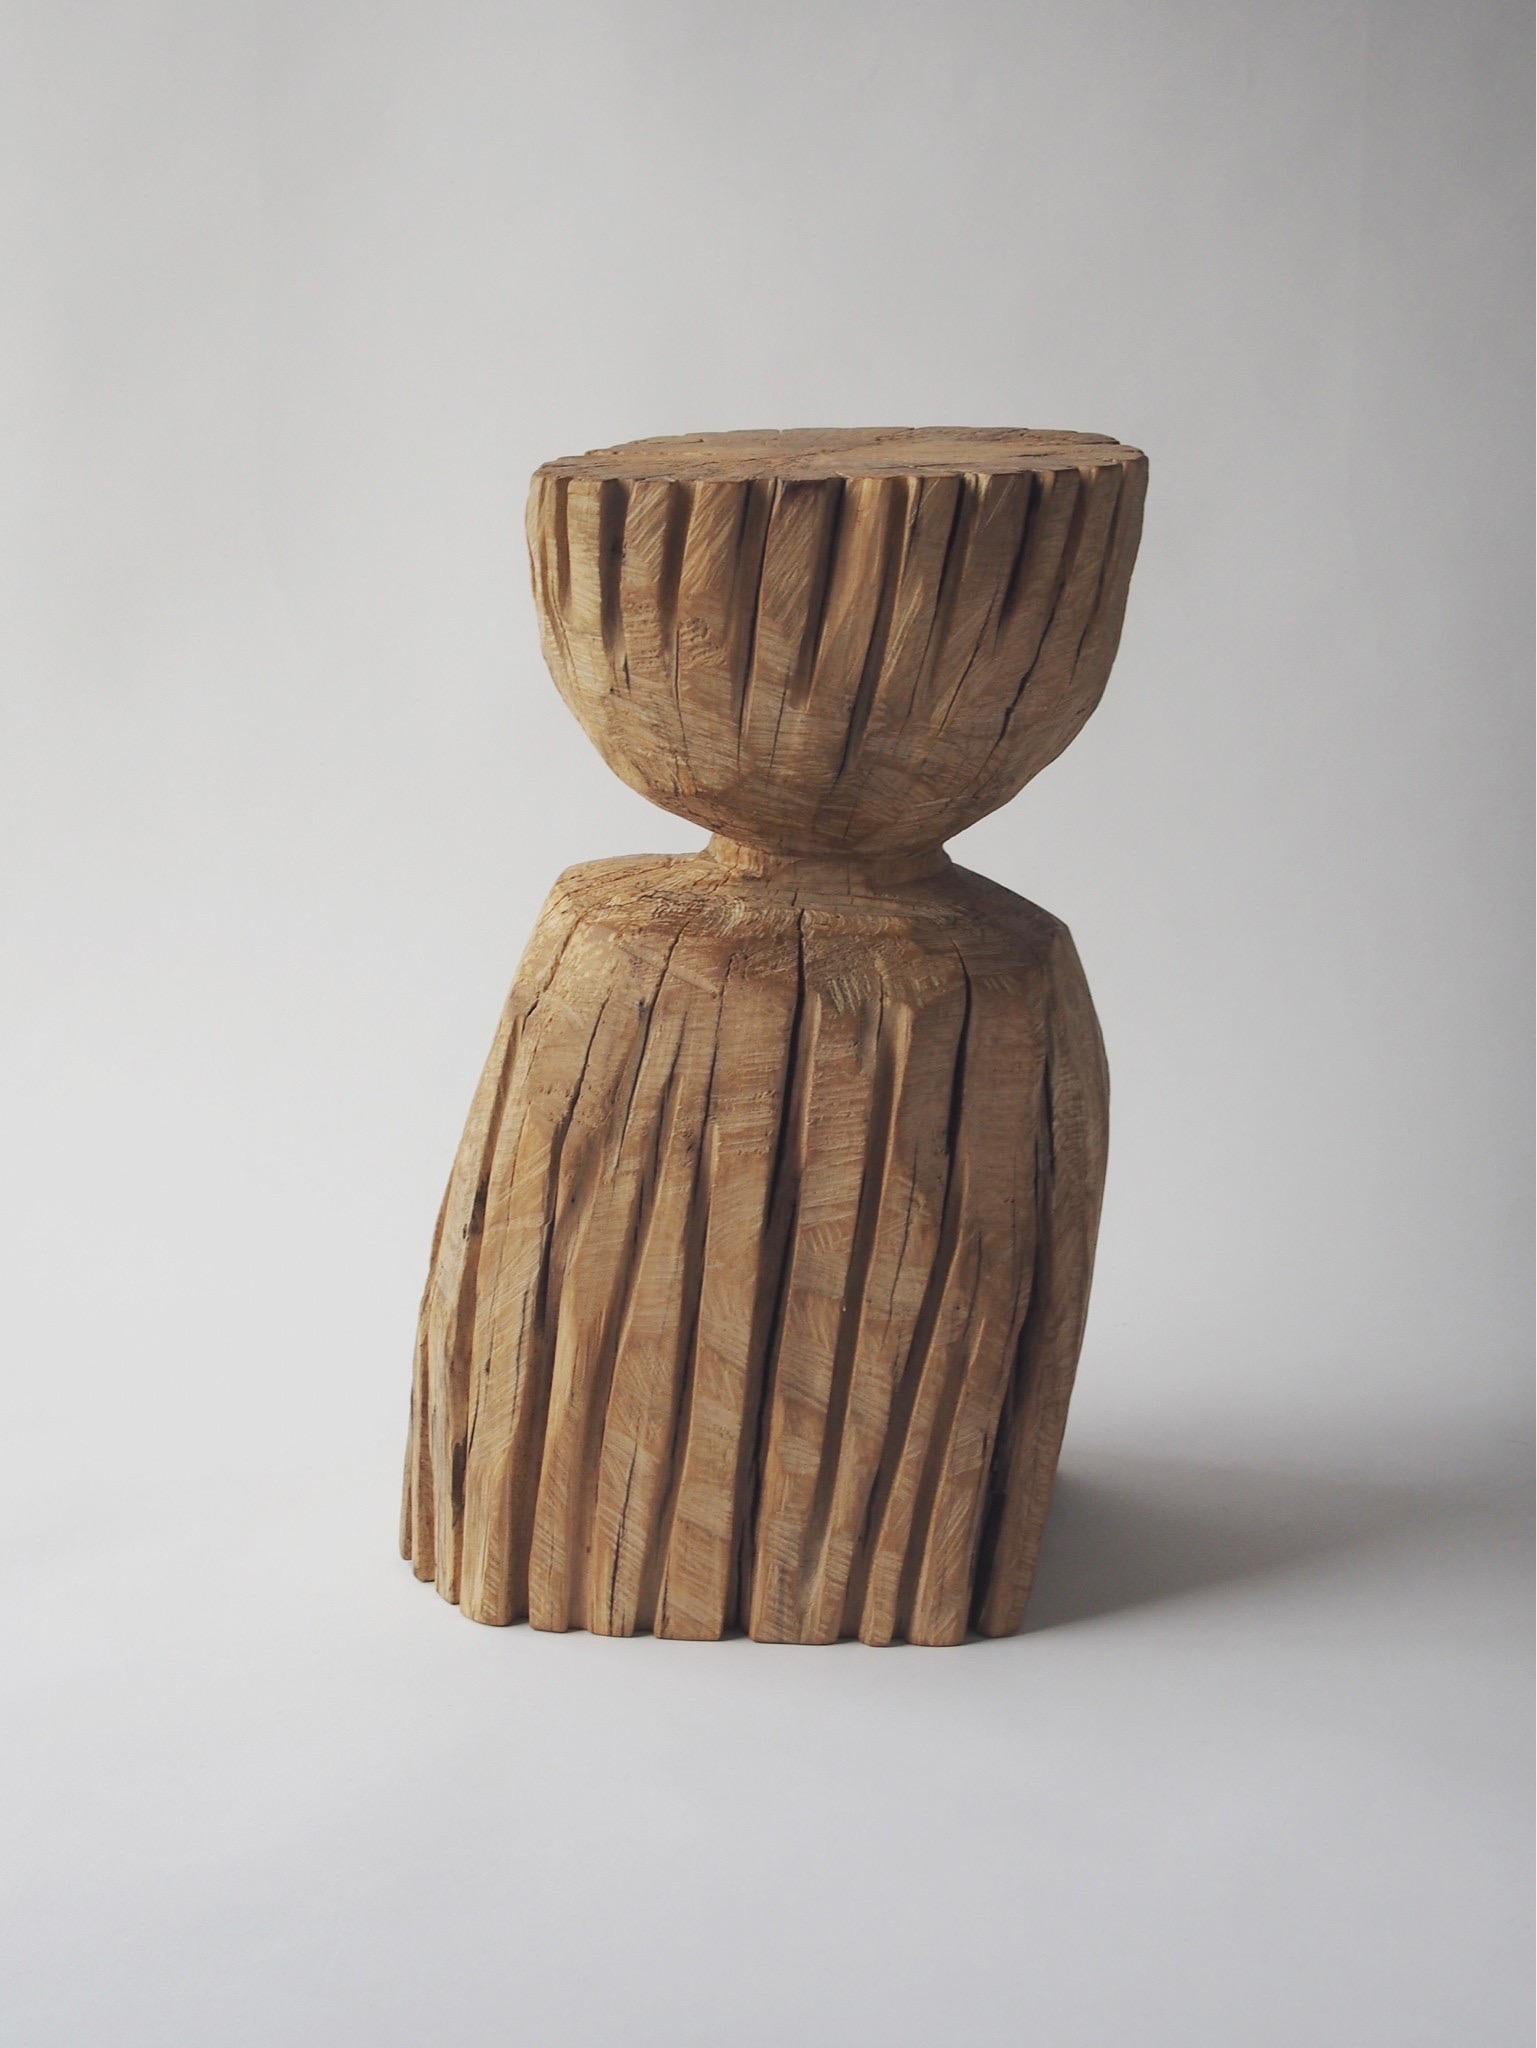 Name: Boy
Sculptural stool by Zougei carved furniture
Material: Zelkova
This work is carved from log with some kinds of chainsaws.
Most of wood used for Nishimura's works are unable to use anything, these woods are unsuitable material for furniture,